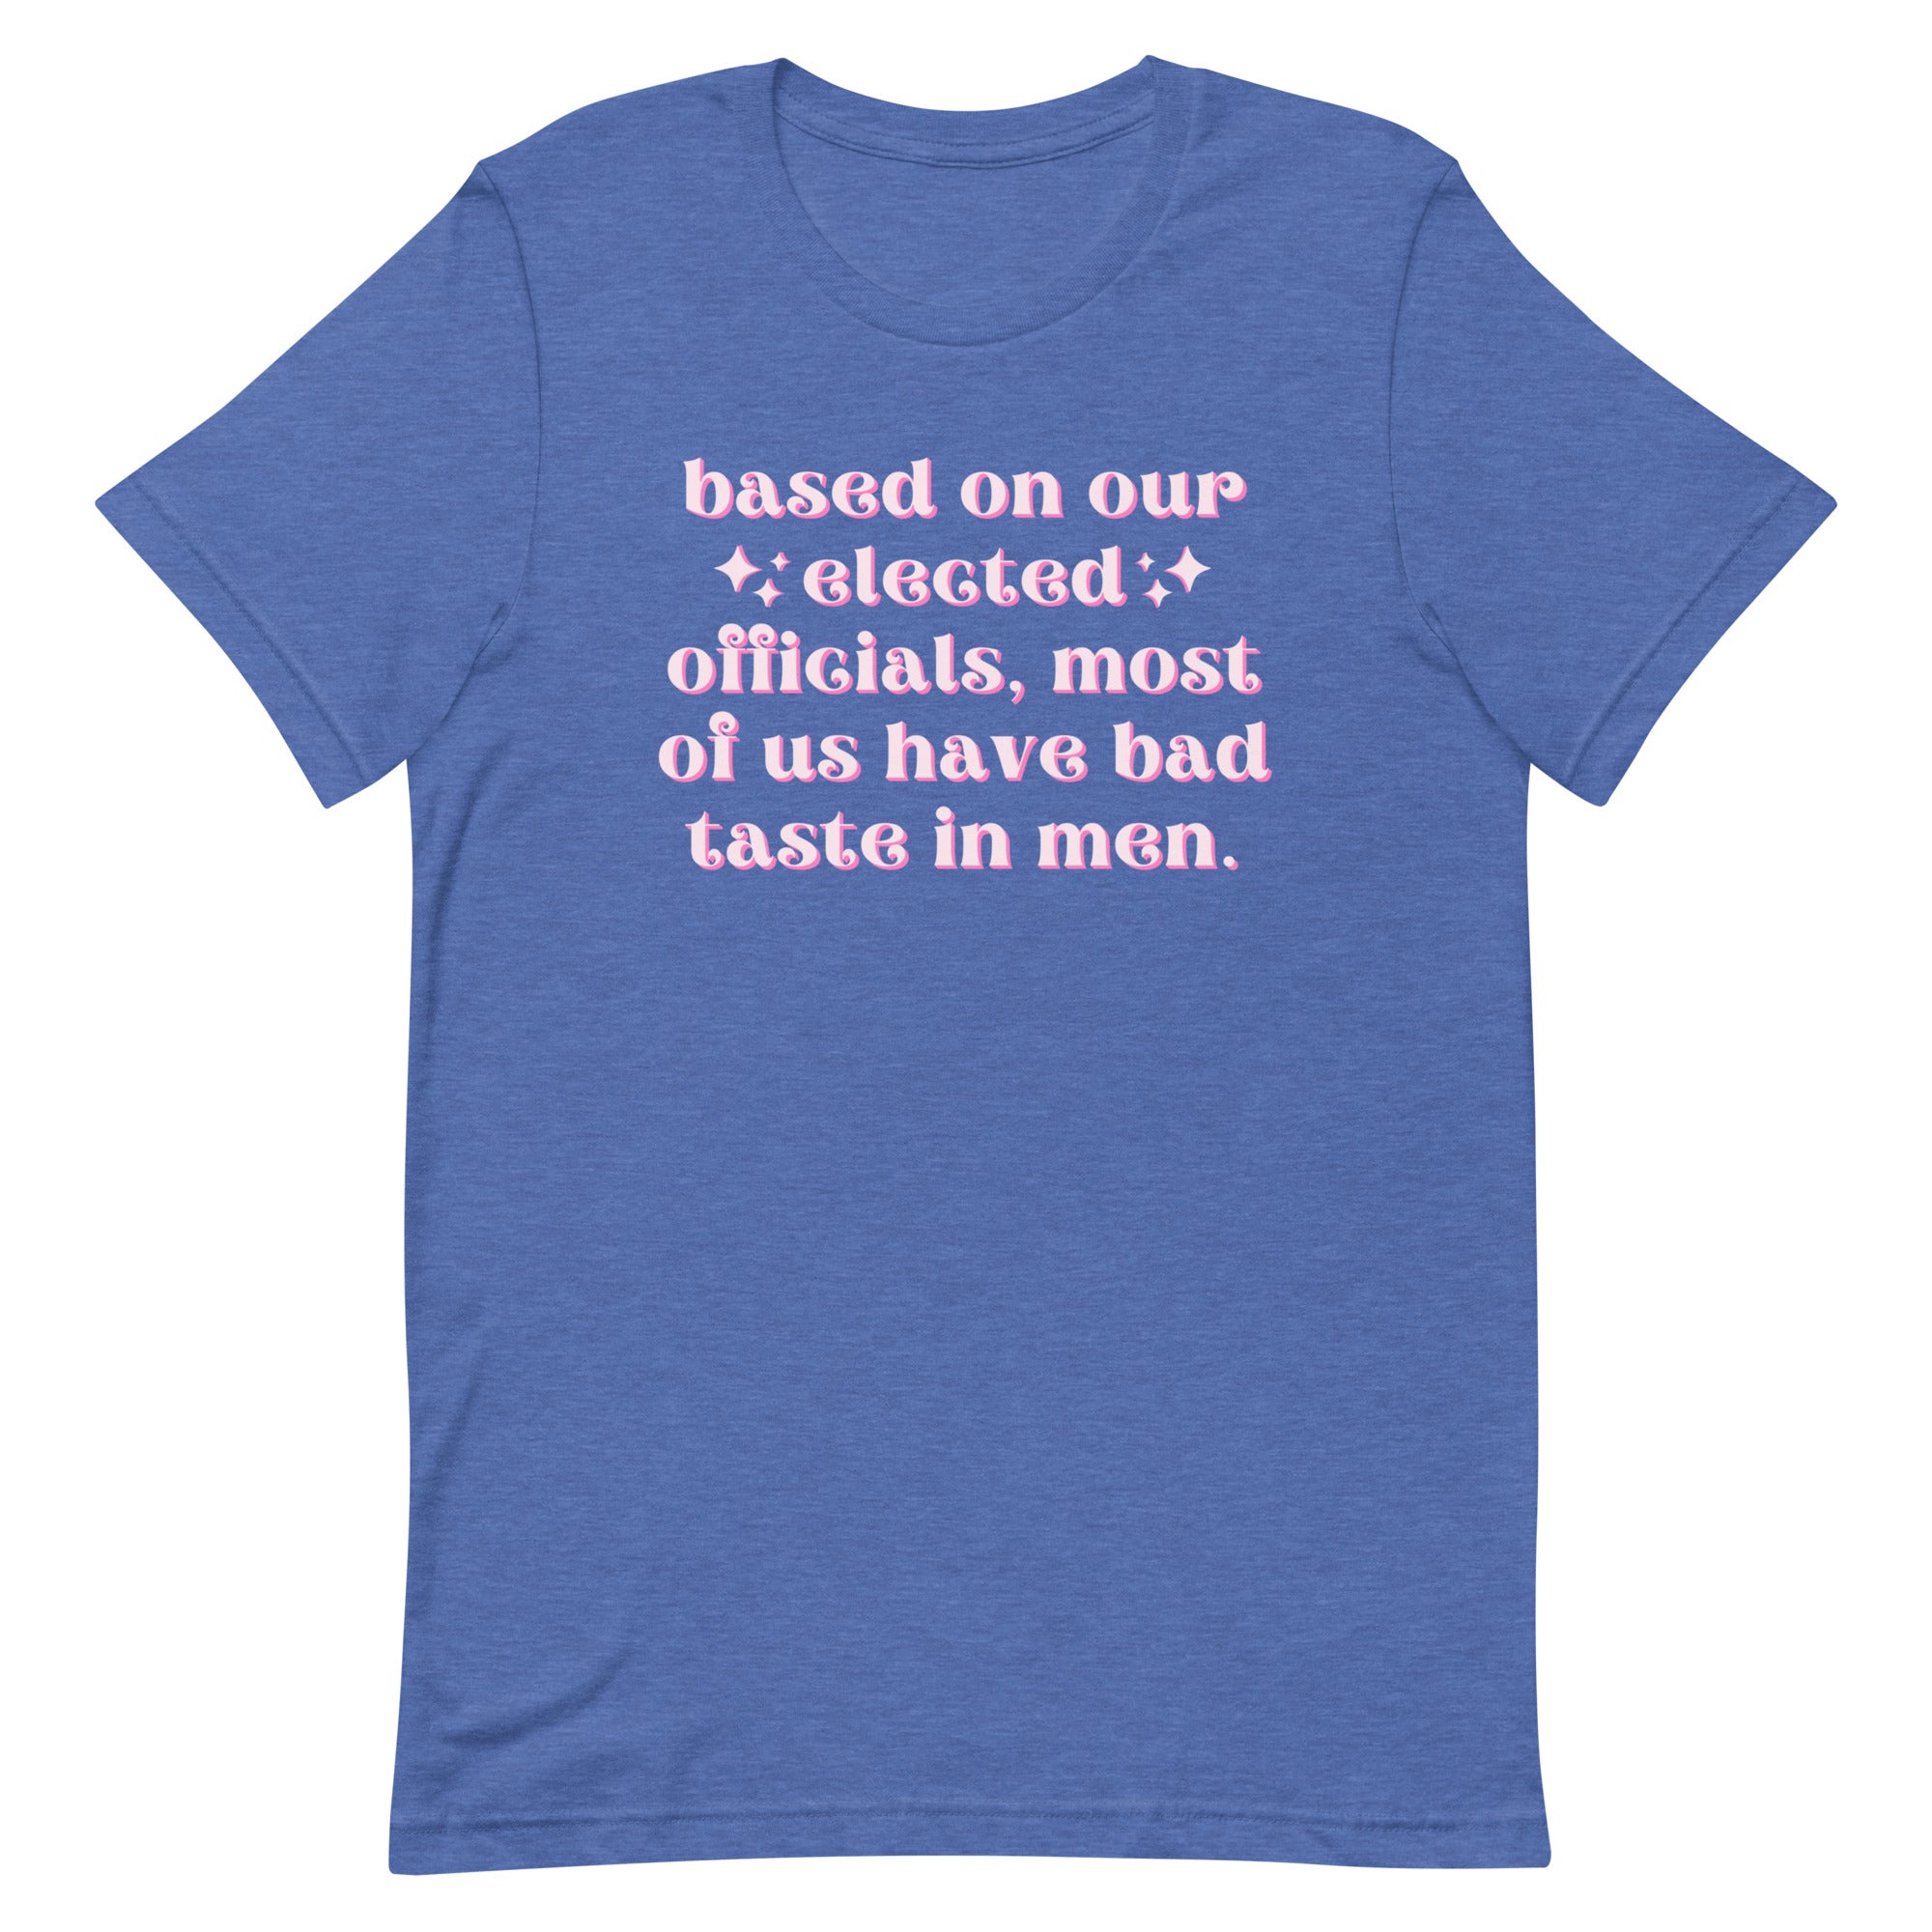 Based On Our Elected Officials…Unisex Feminist t-shirt - Shop Women’s Rights T-Shirts - Feminist Trash Store - Heather Royal Blue